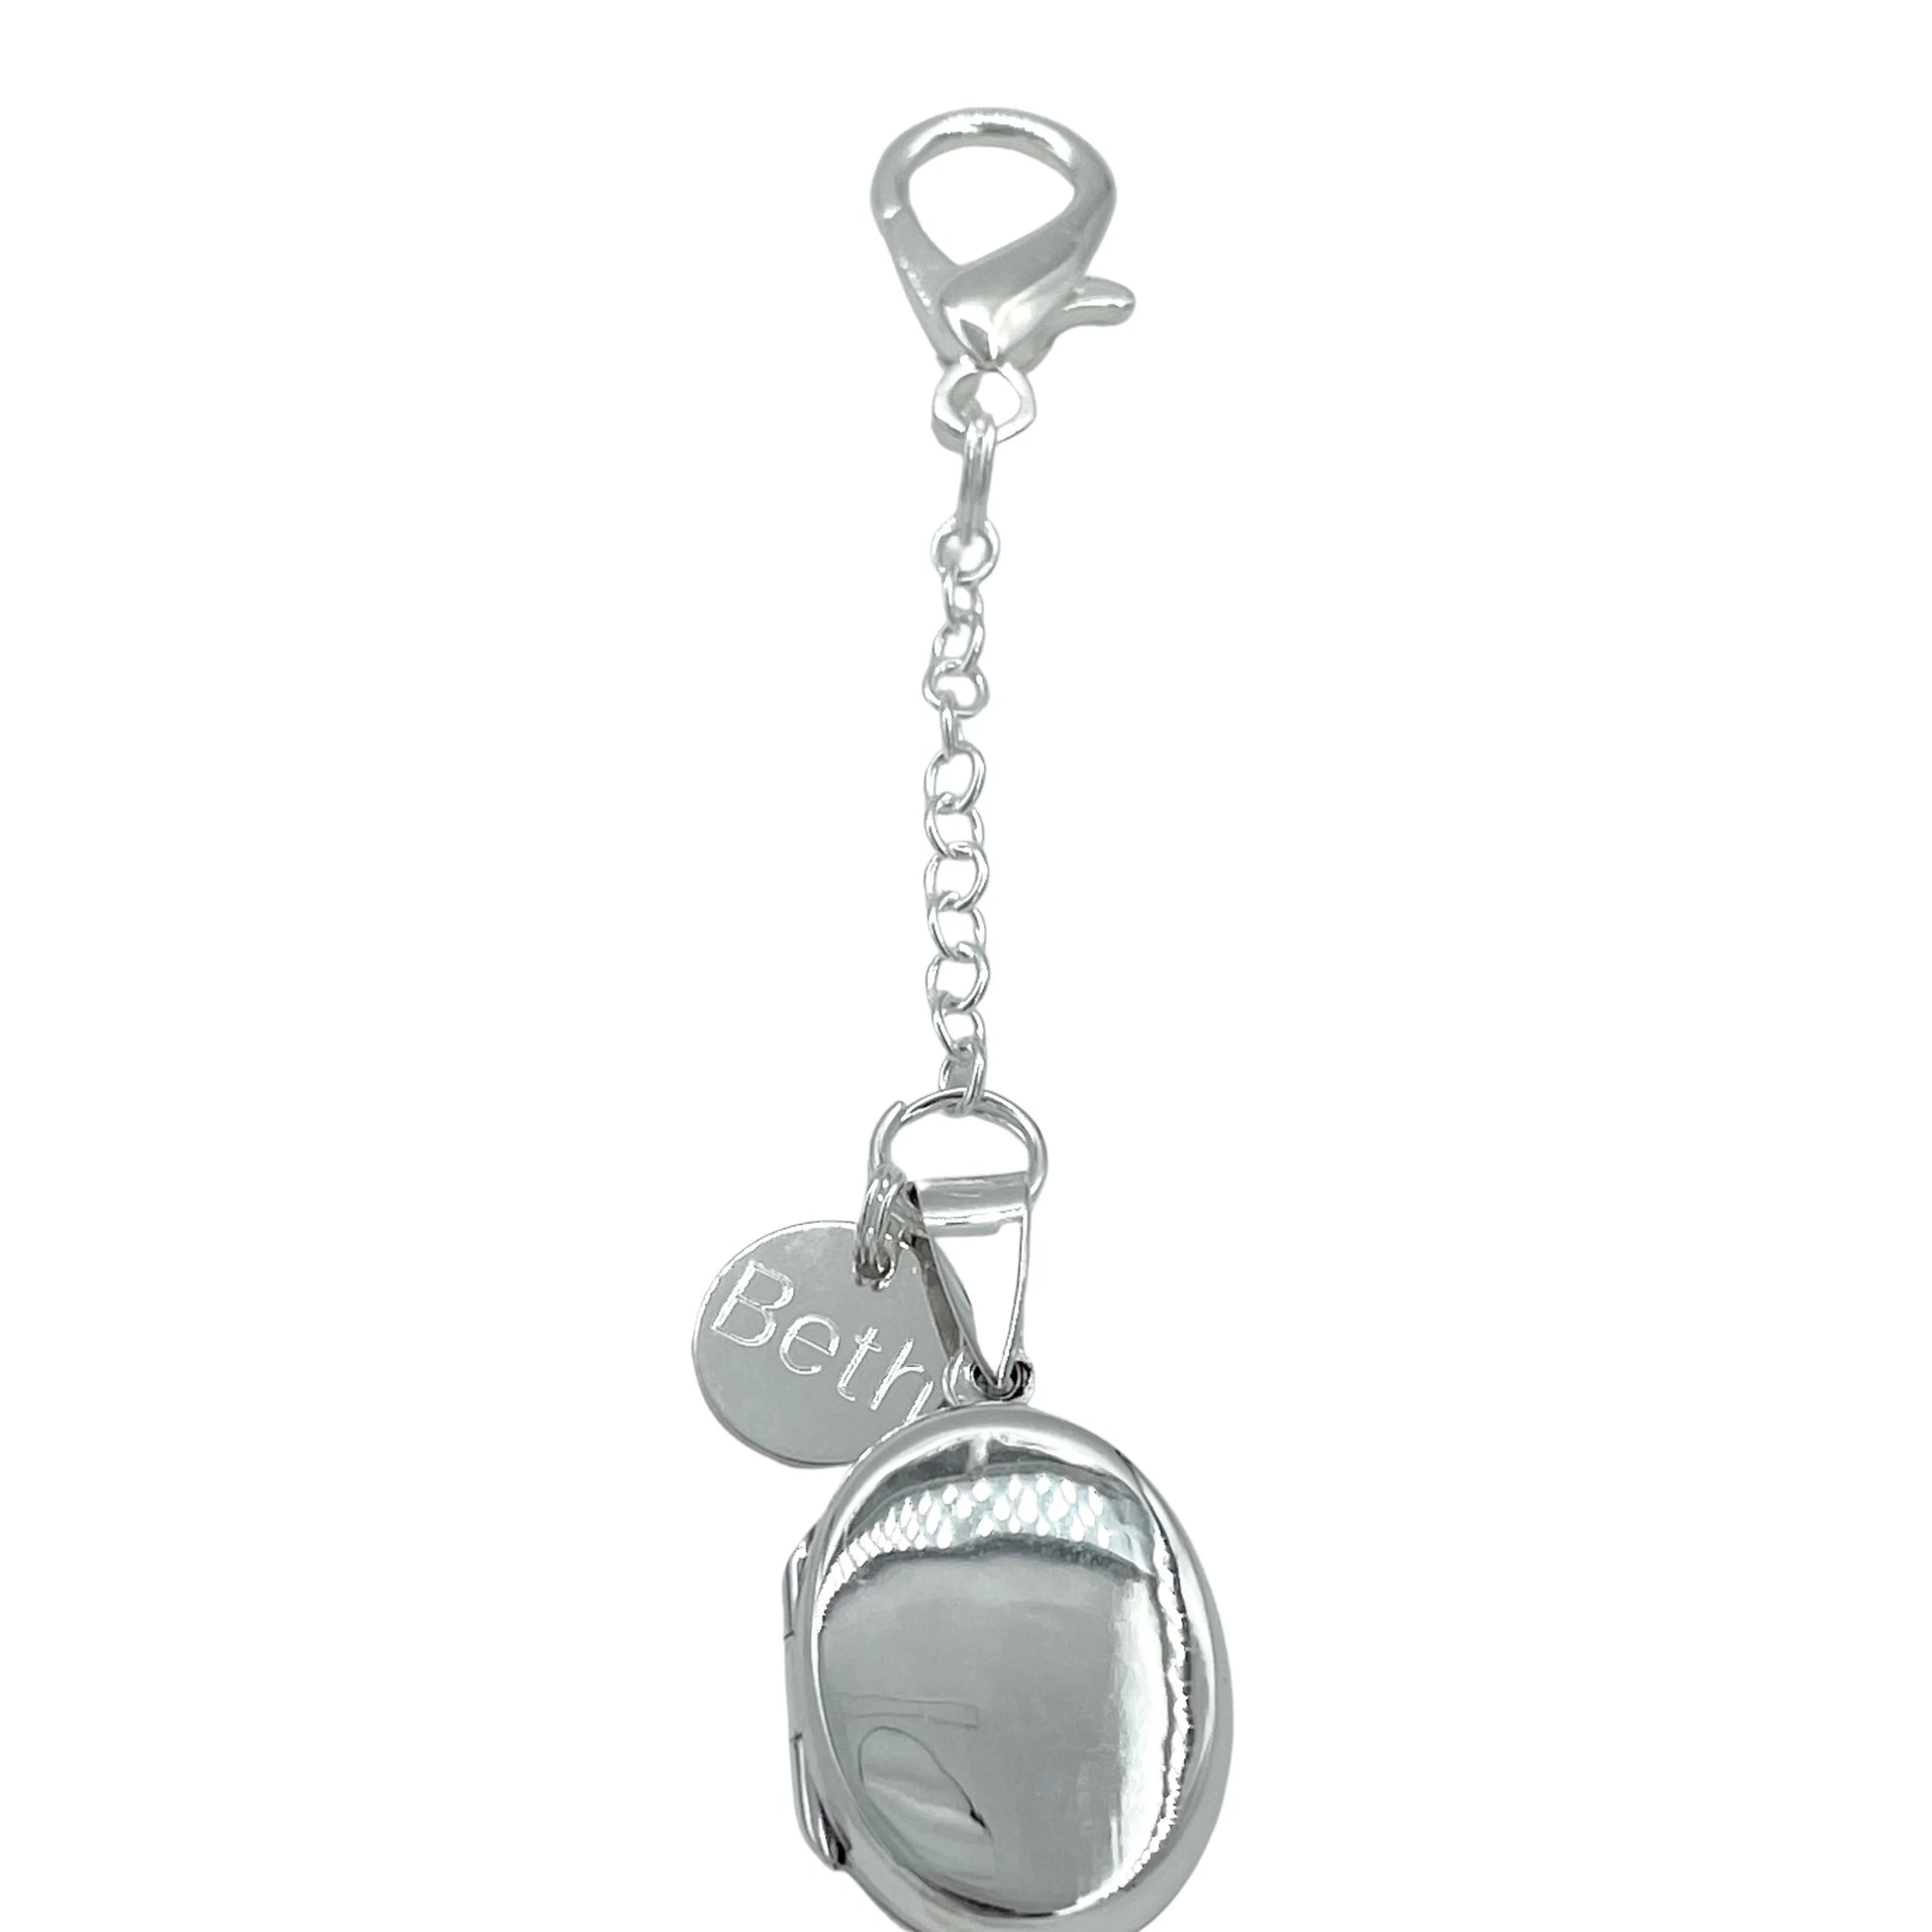 Sterling silver oval locket shown with lobster clasp fastening and optional engraved sterling silver tag